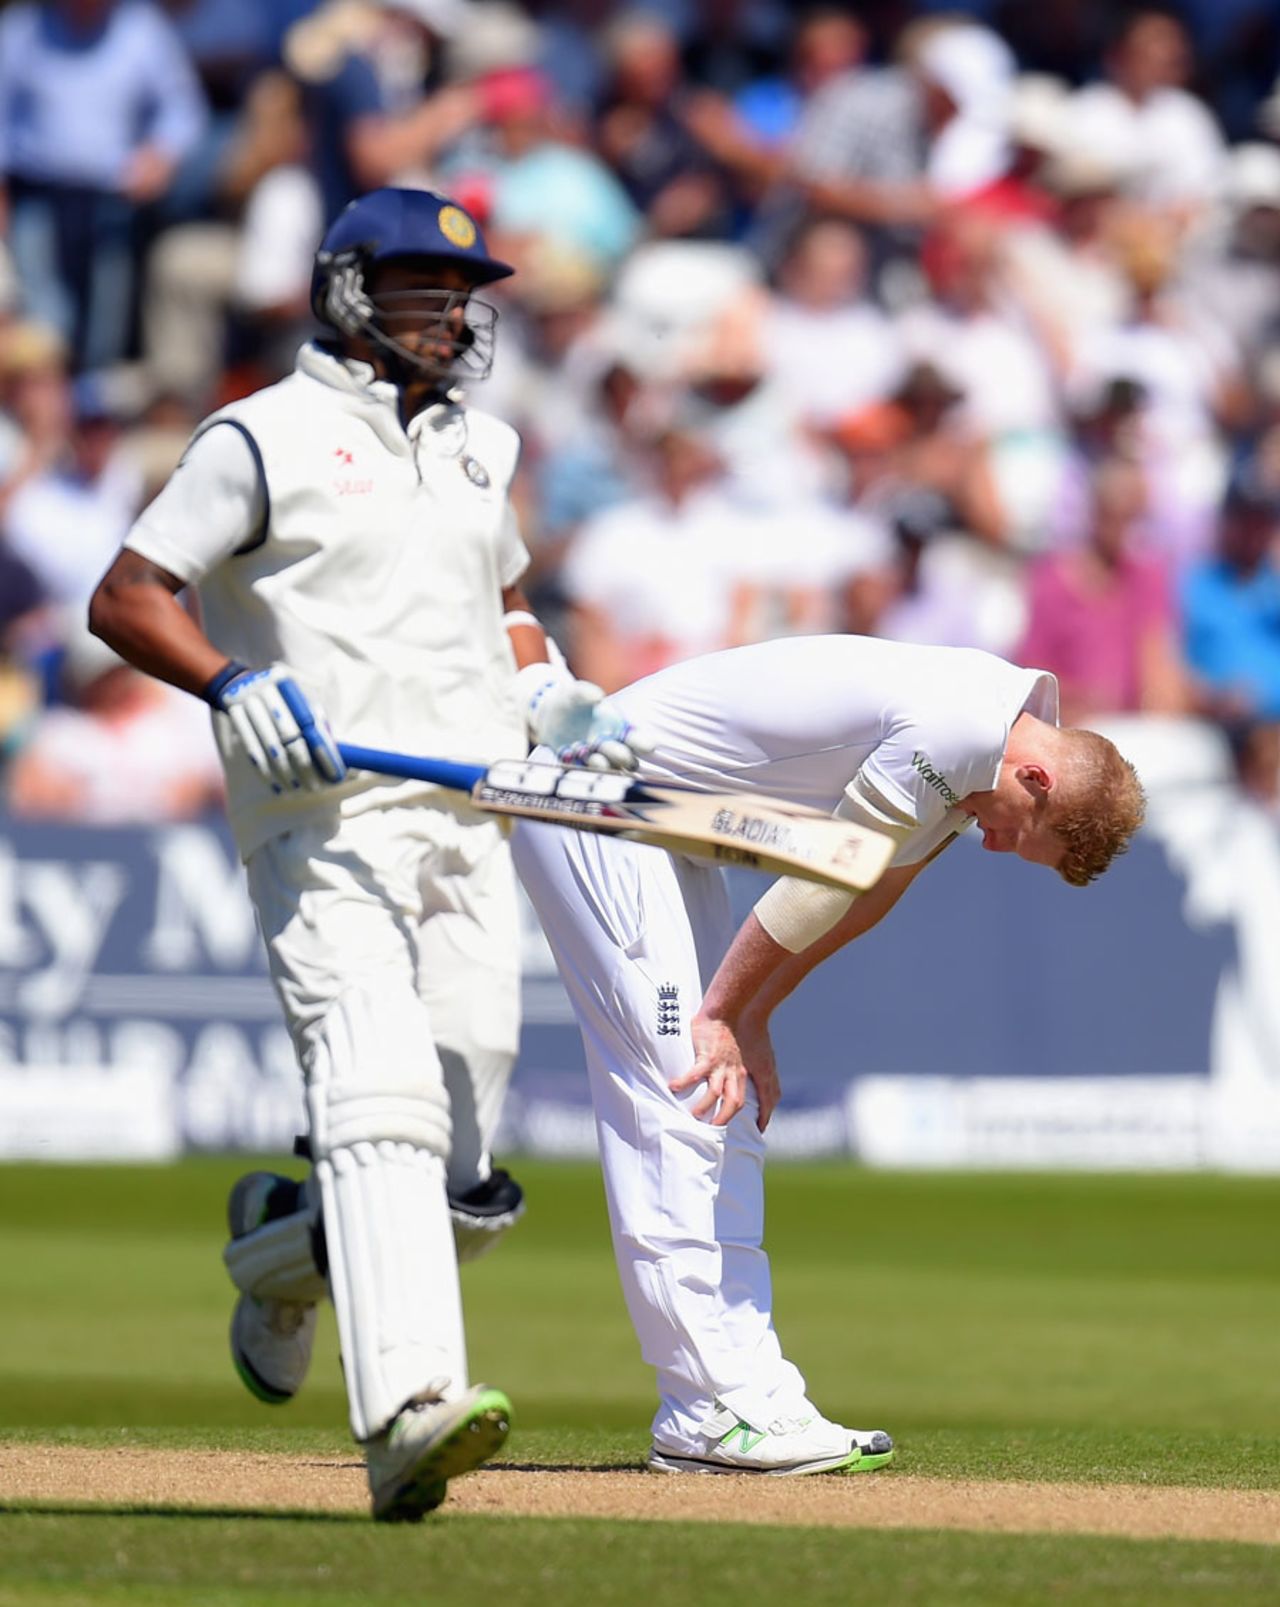 Ben Stokes wears a frustrated look as M Vijay completes a run, England v India, 1st Investec Test, Trent Bridge, 2nd day, July 10, 2014